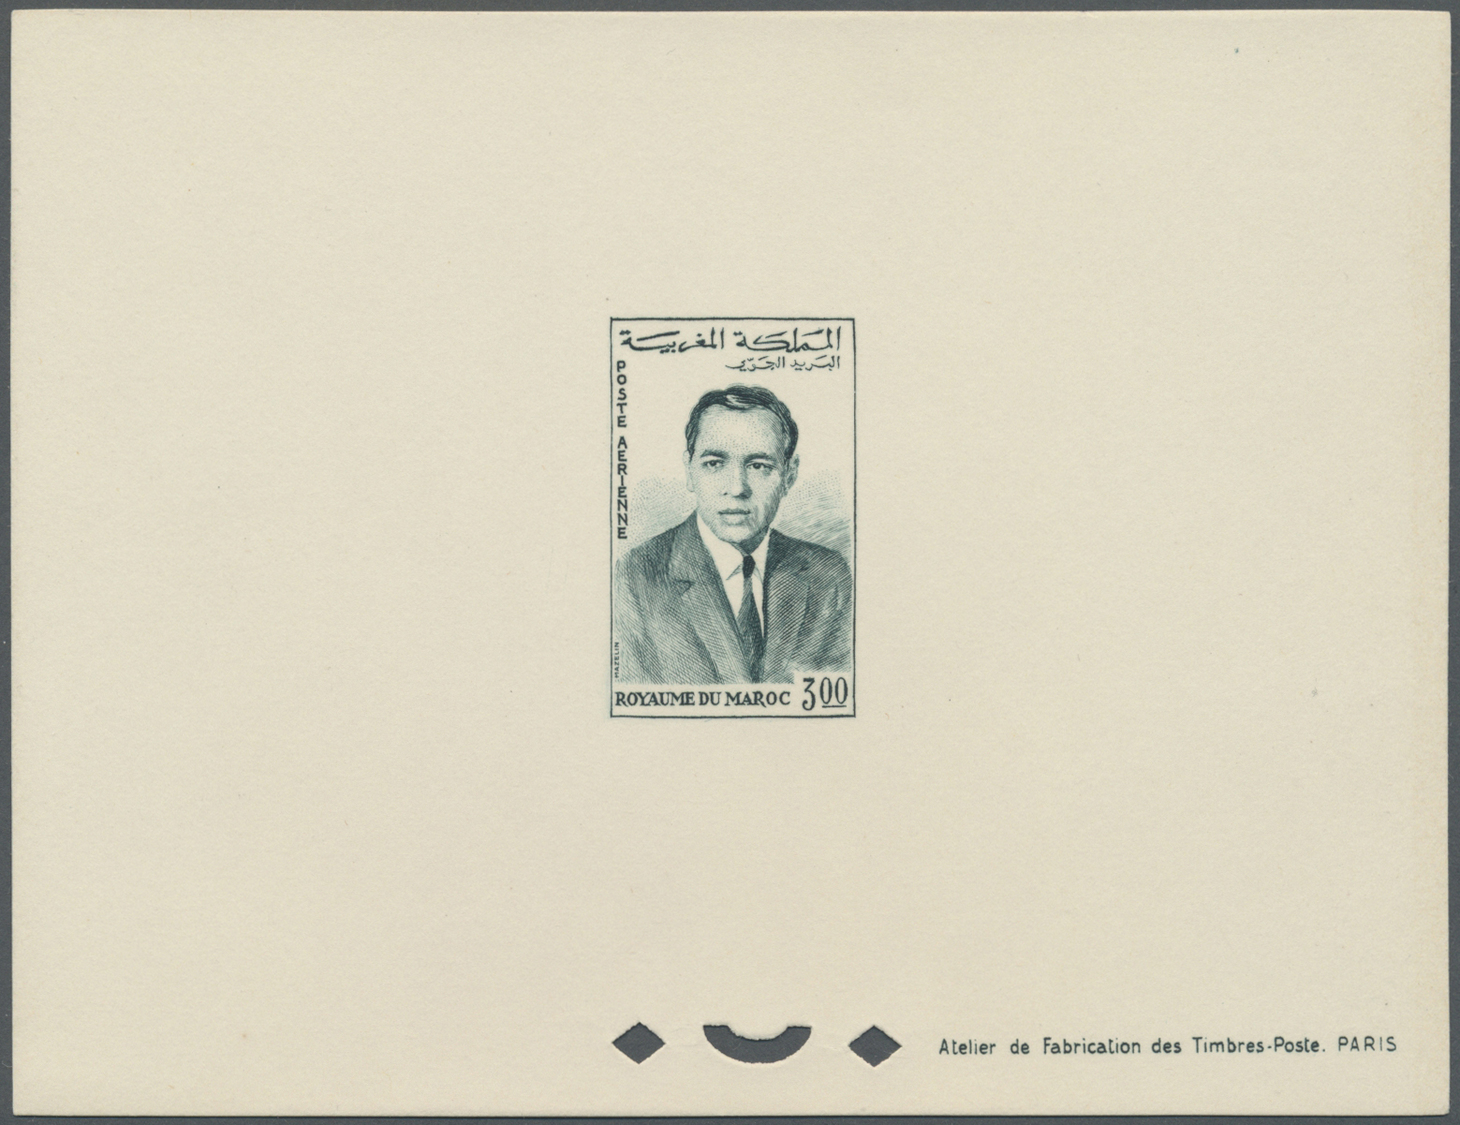 (*) Marokko: 1962, King Hassan II, 0.01dh. to 5.00dh., 13 values (issued on 14 Jun + 4 Oct 1962) as epreuve de luxe; in 